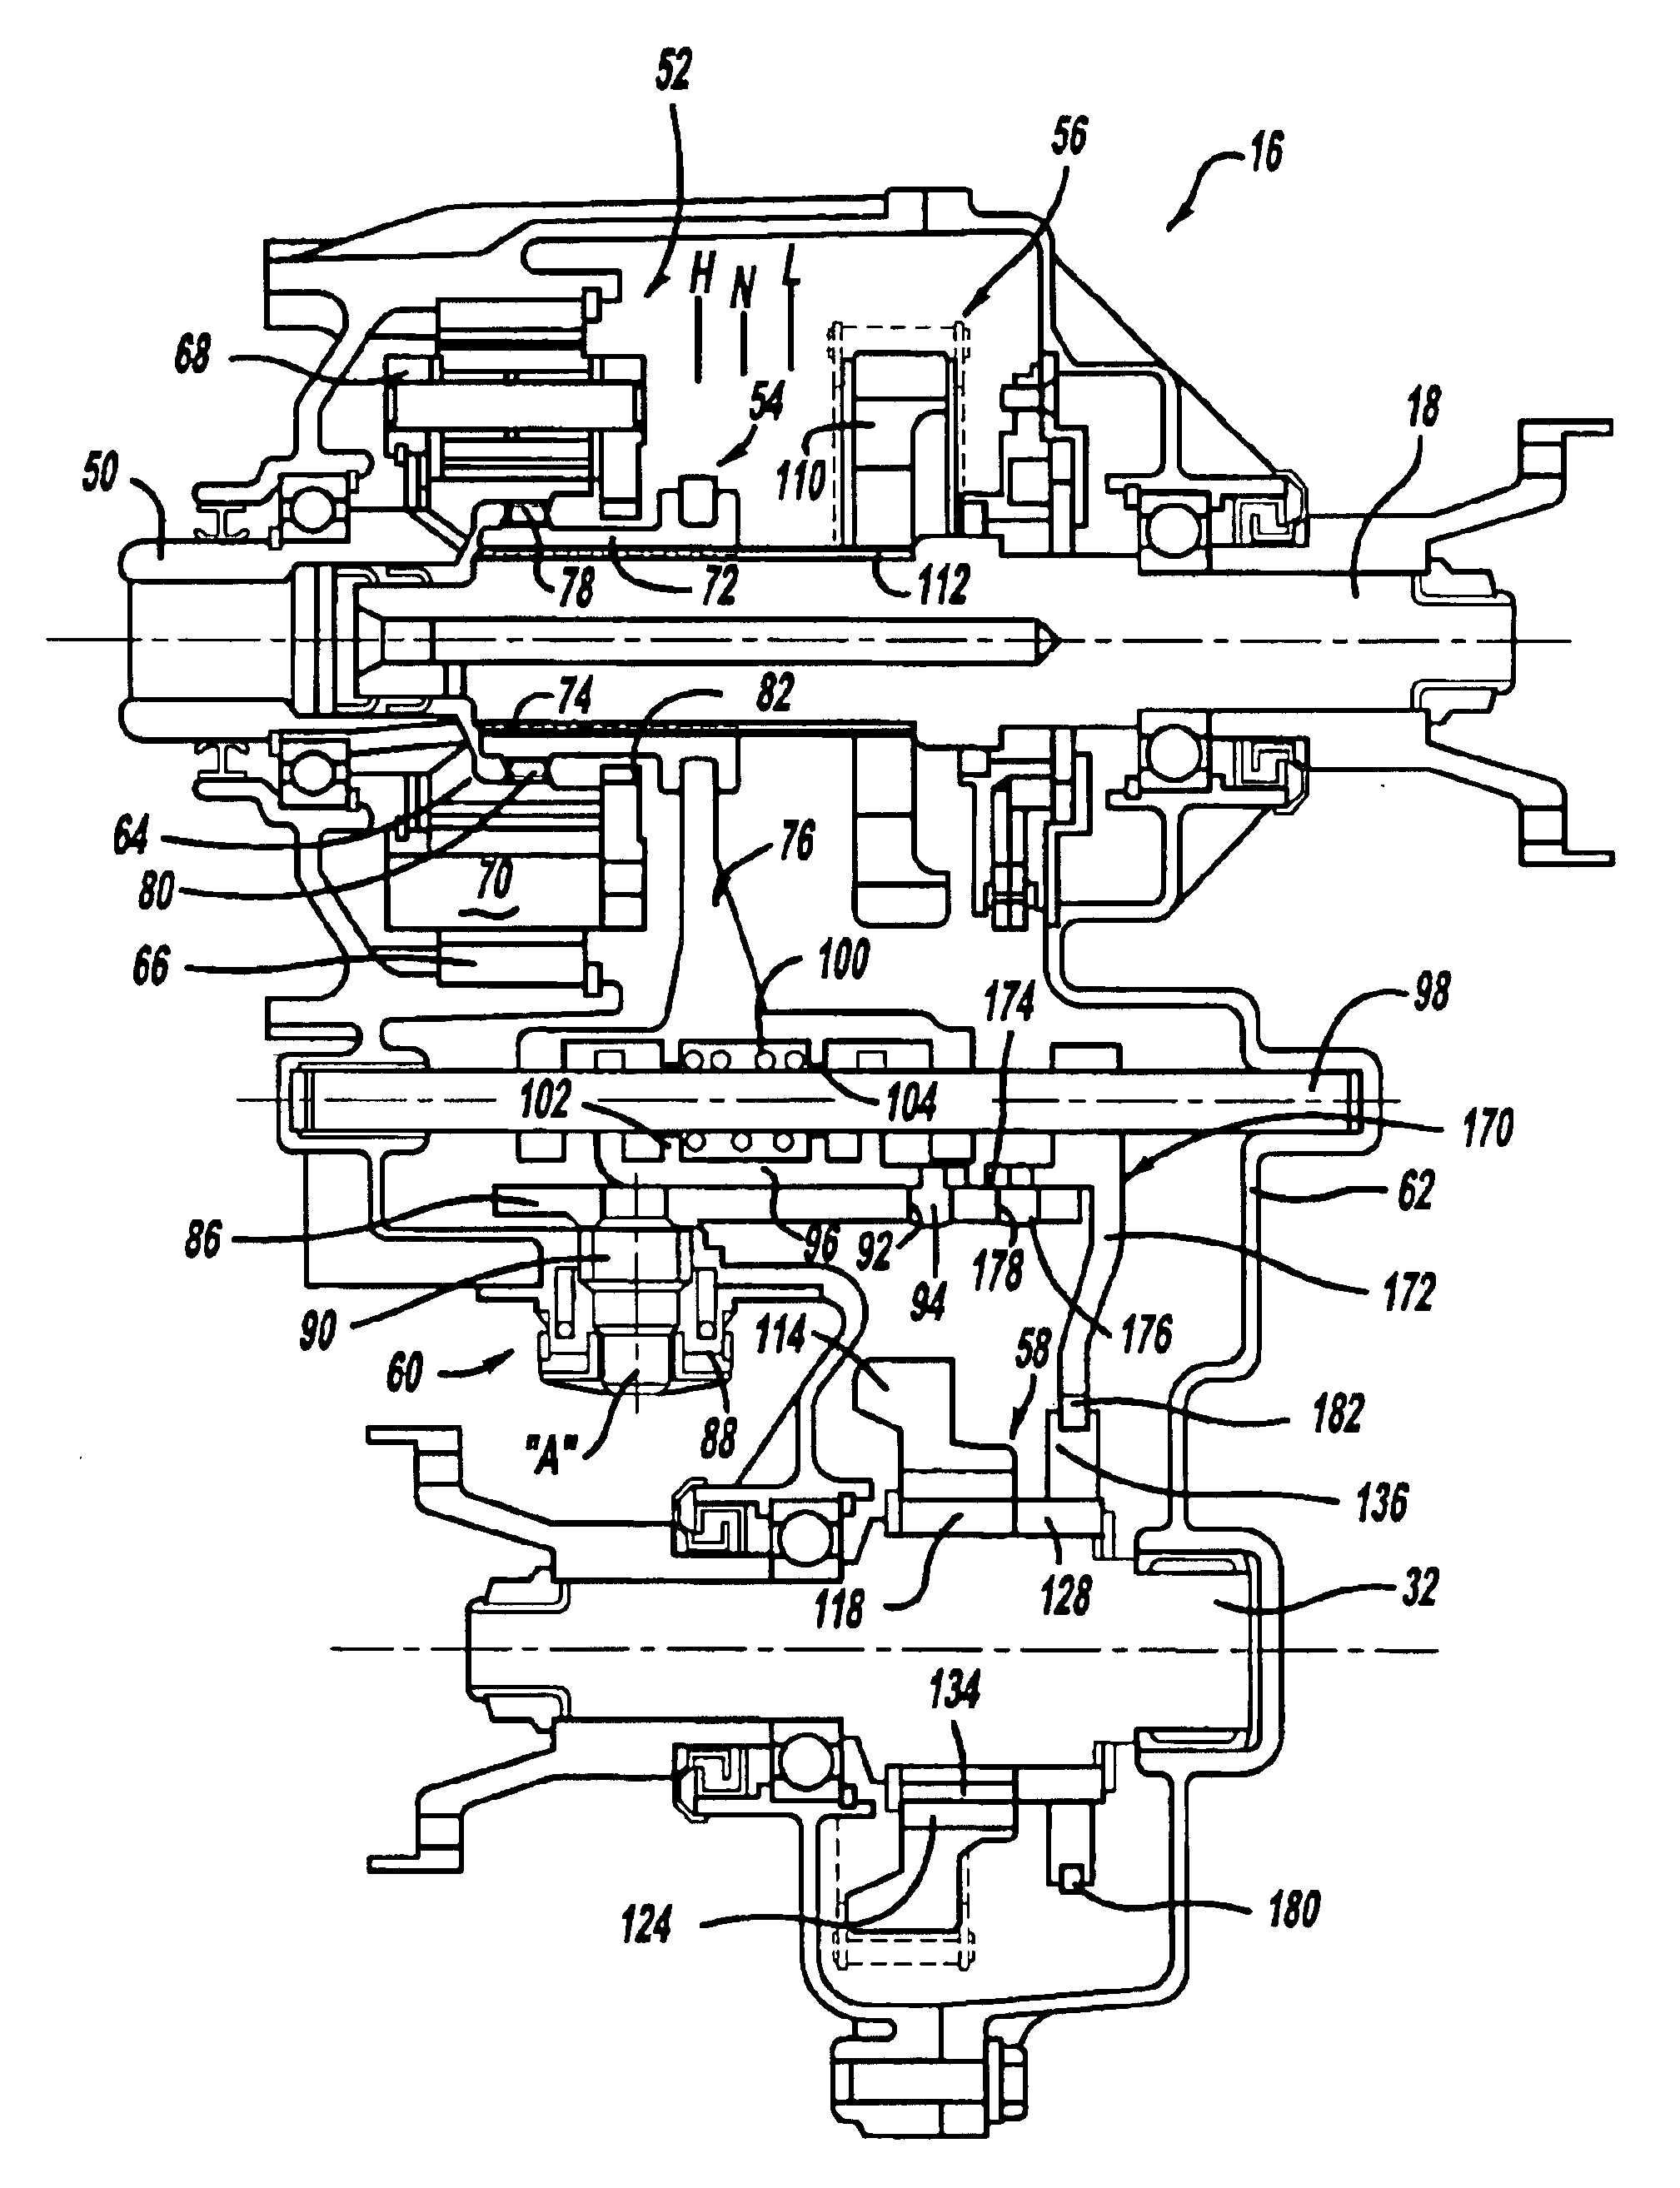 Transfer case shift system for controllable bi-directional overrunning clutch